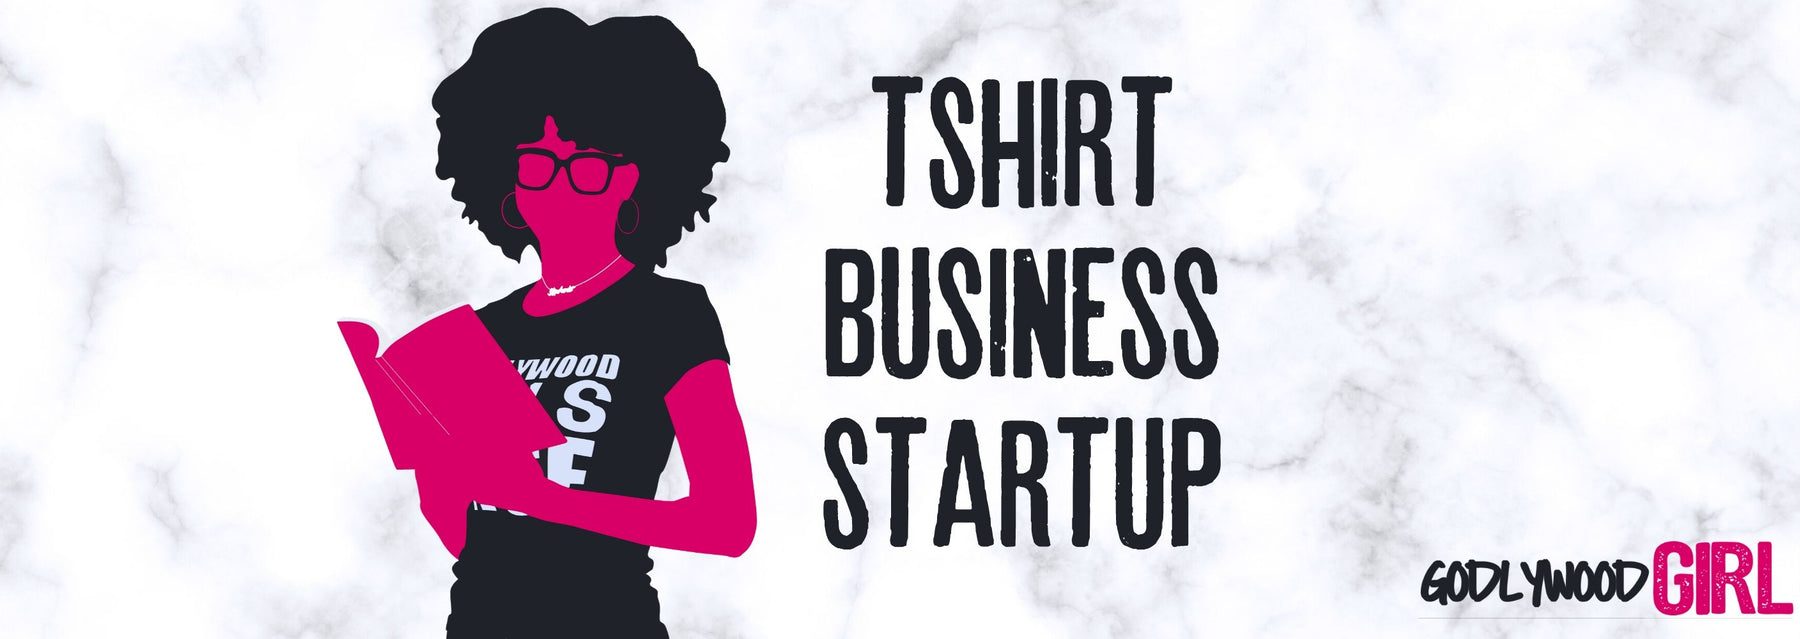 TSHIRT BUSINESS STARTUP | 3 BIGGEST Mistakes When Starting A T-Shirt Business Online (Entrepreneur)